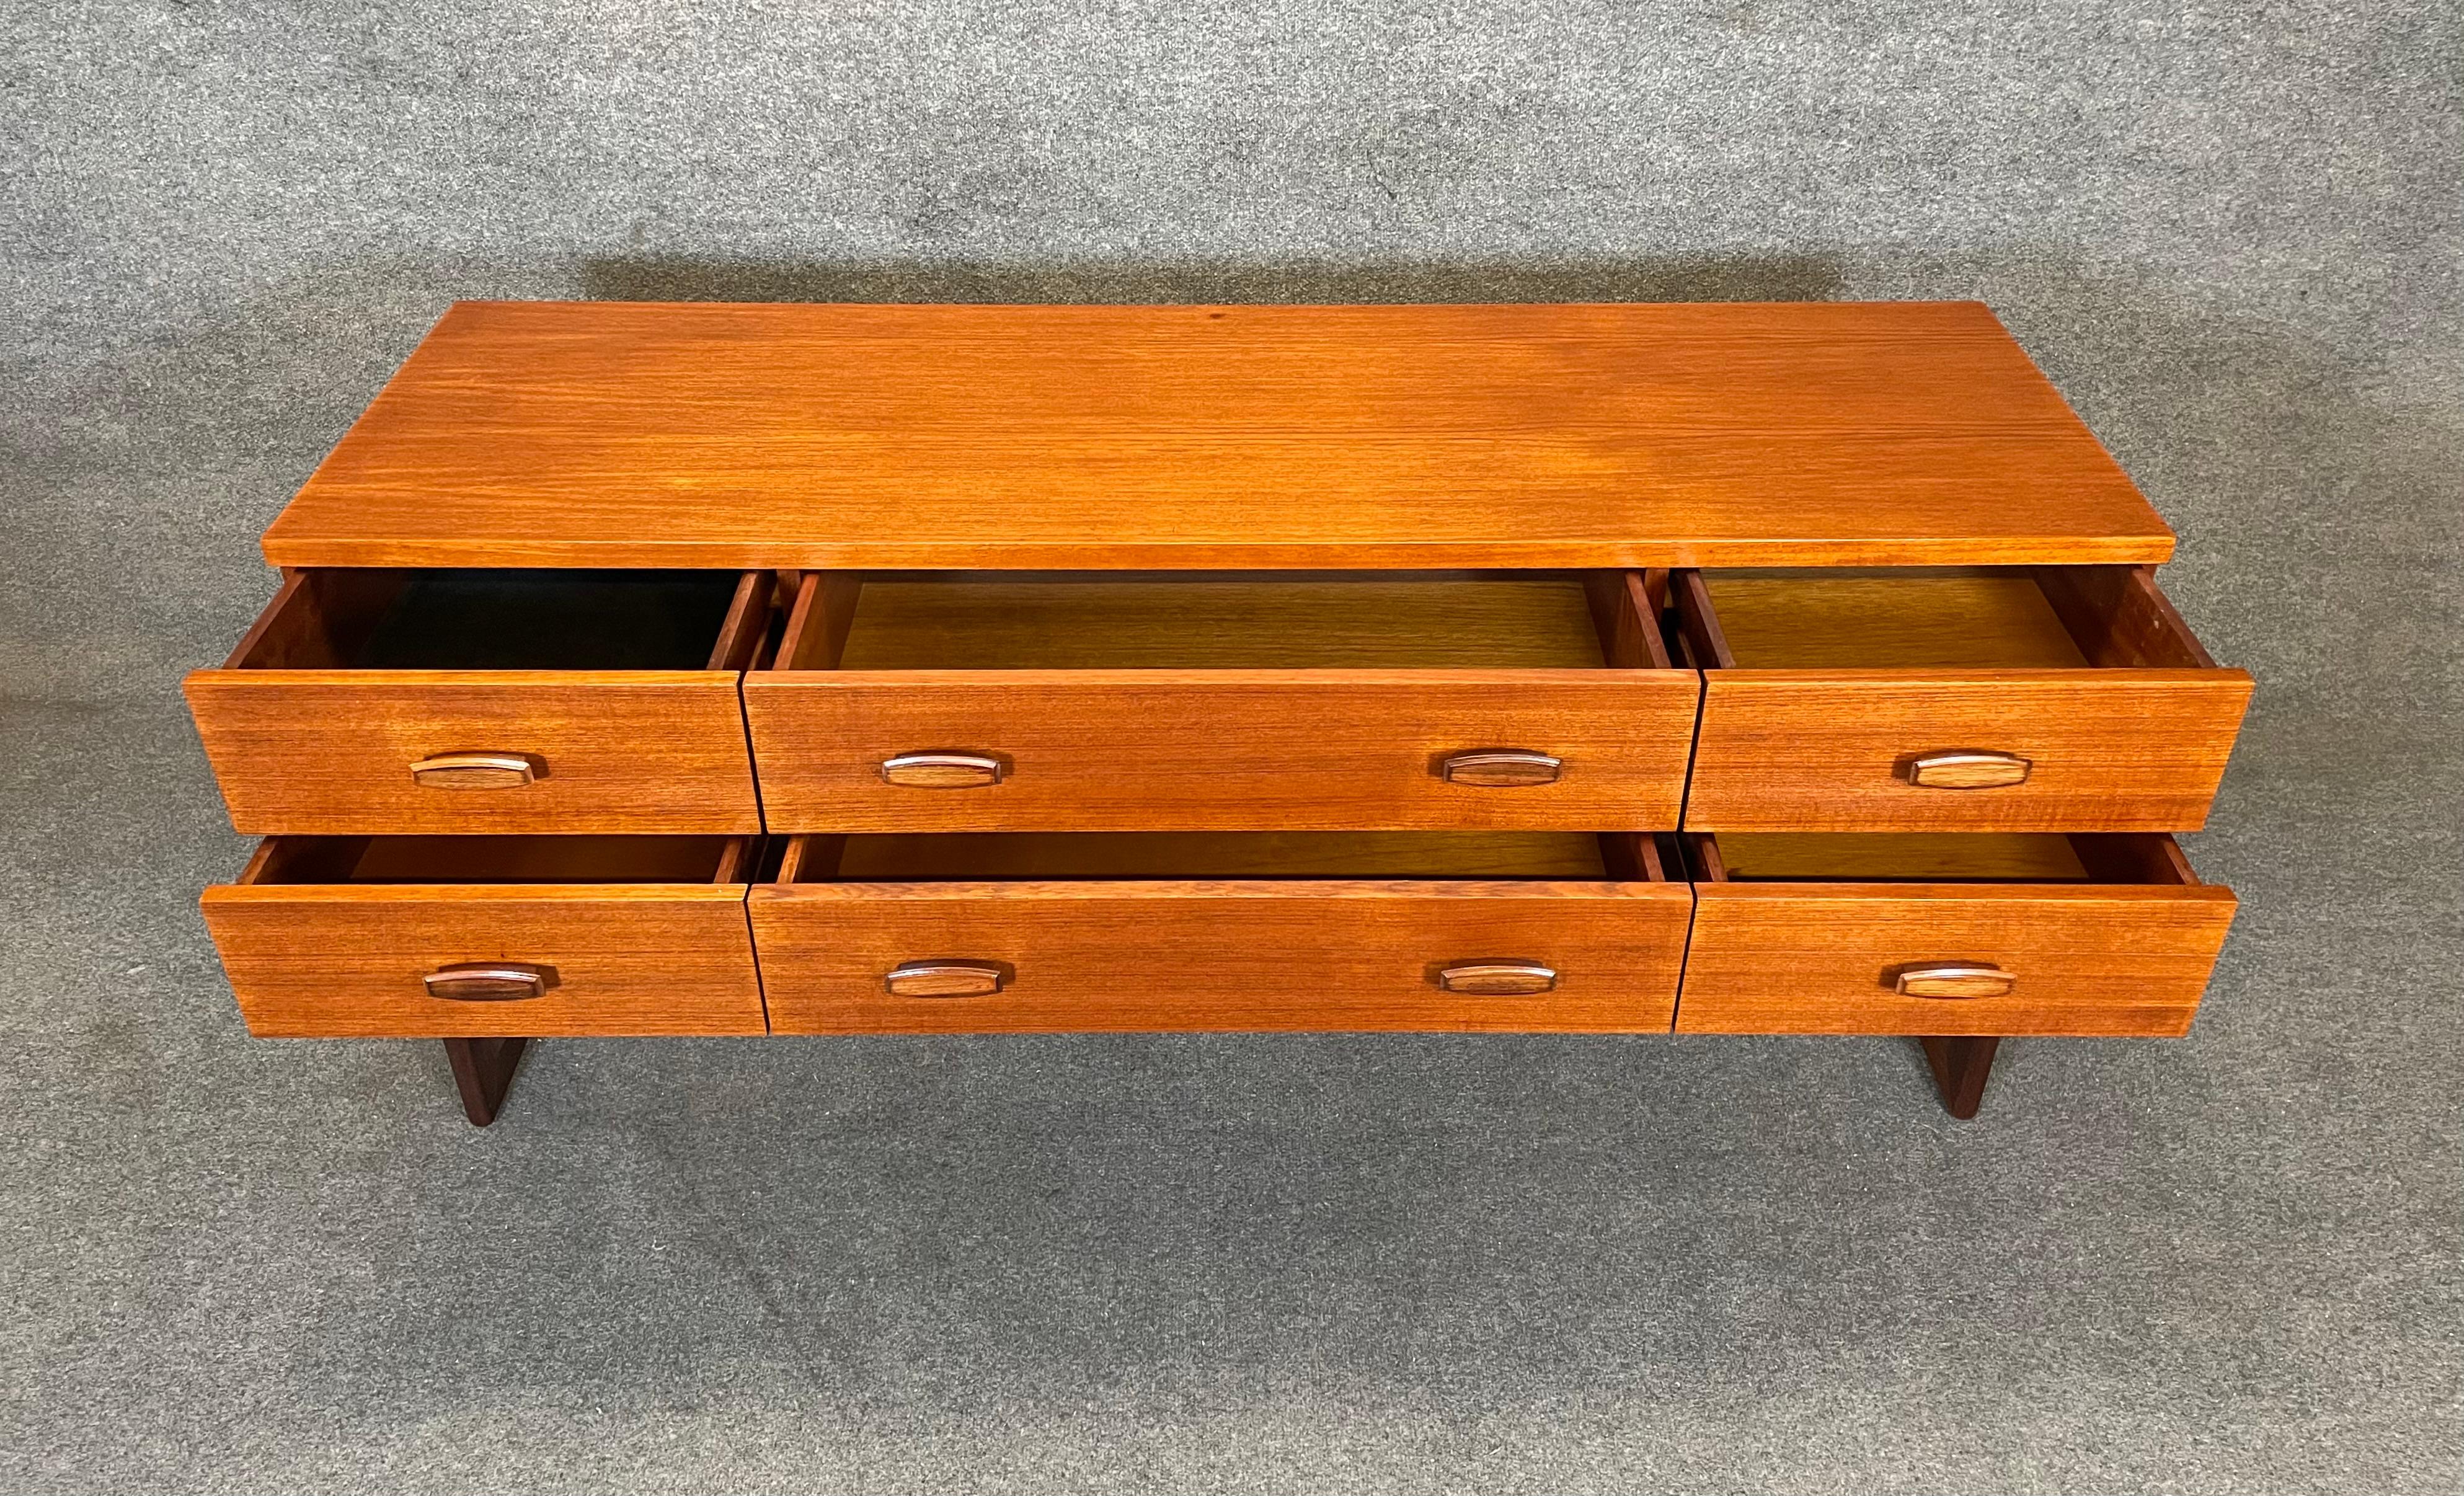 Here is a beautiful and rare British MCM teak credenza-dresser-console from the 